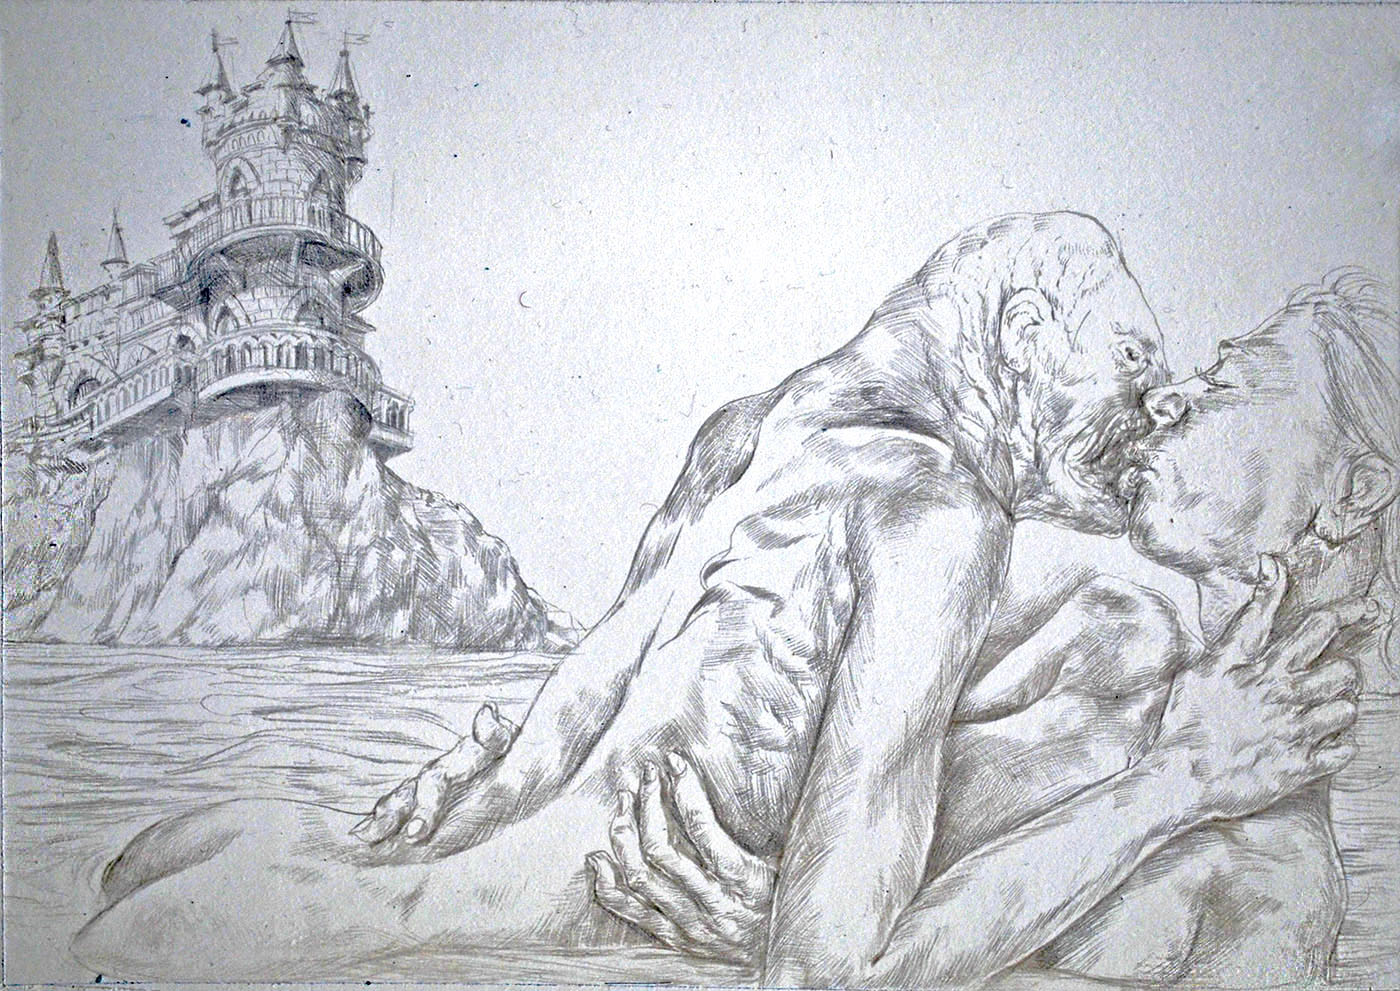 Dylan Rabe - Castles Made of Sand Silverpoint